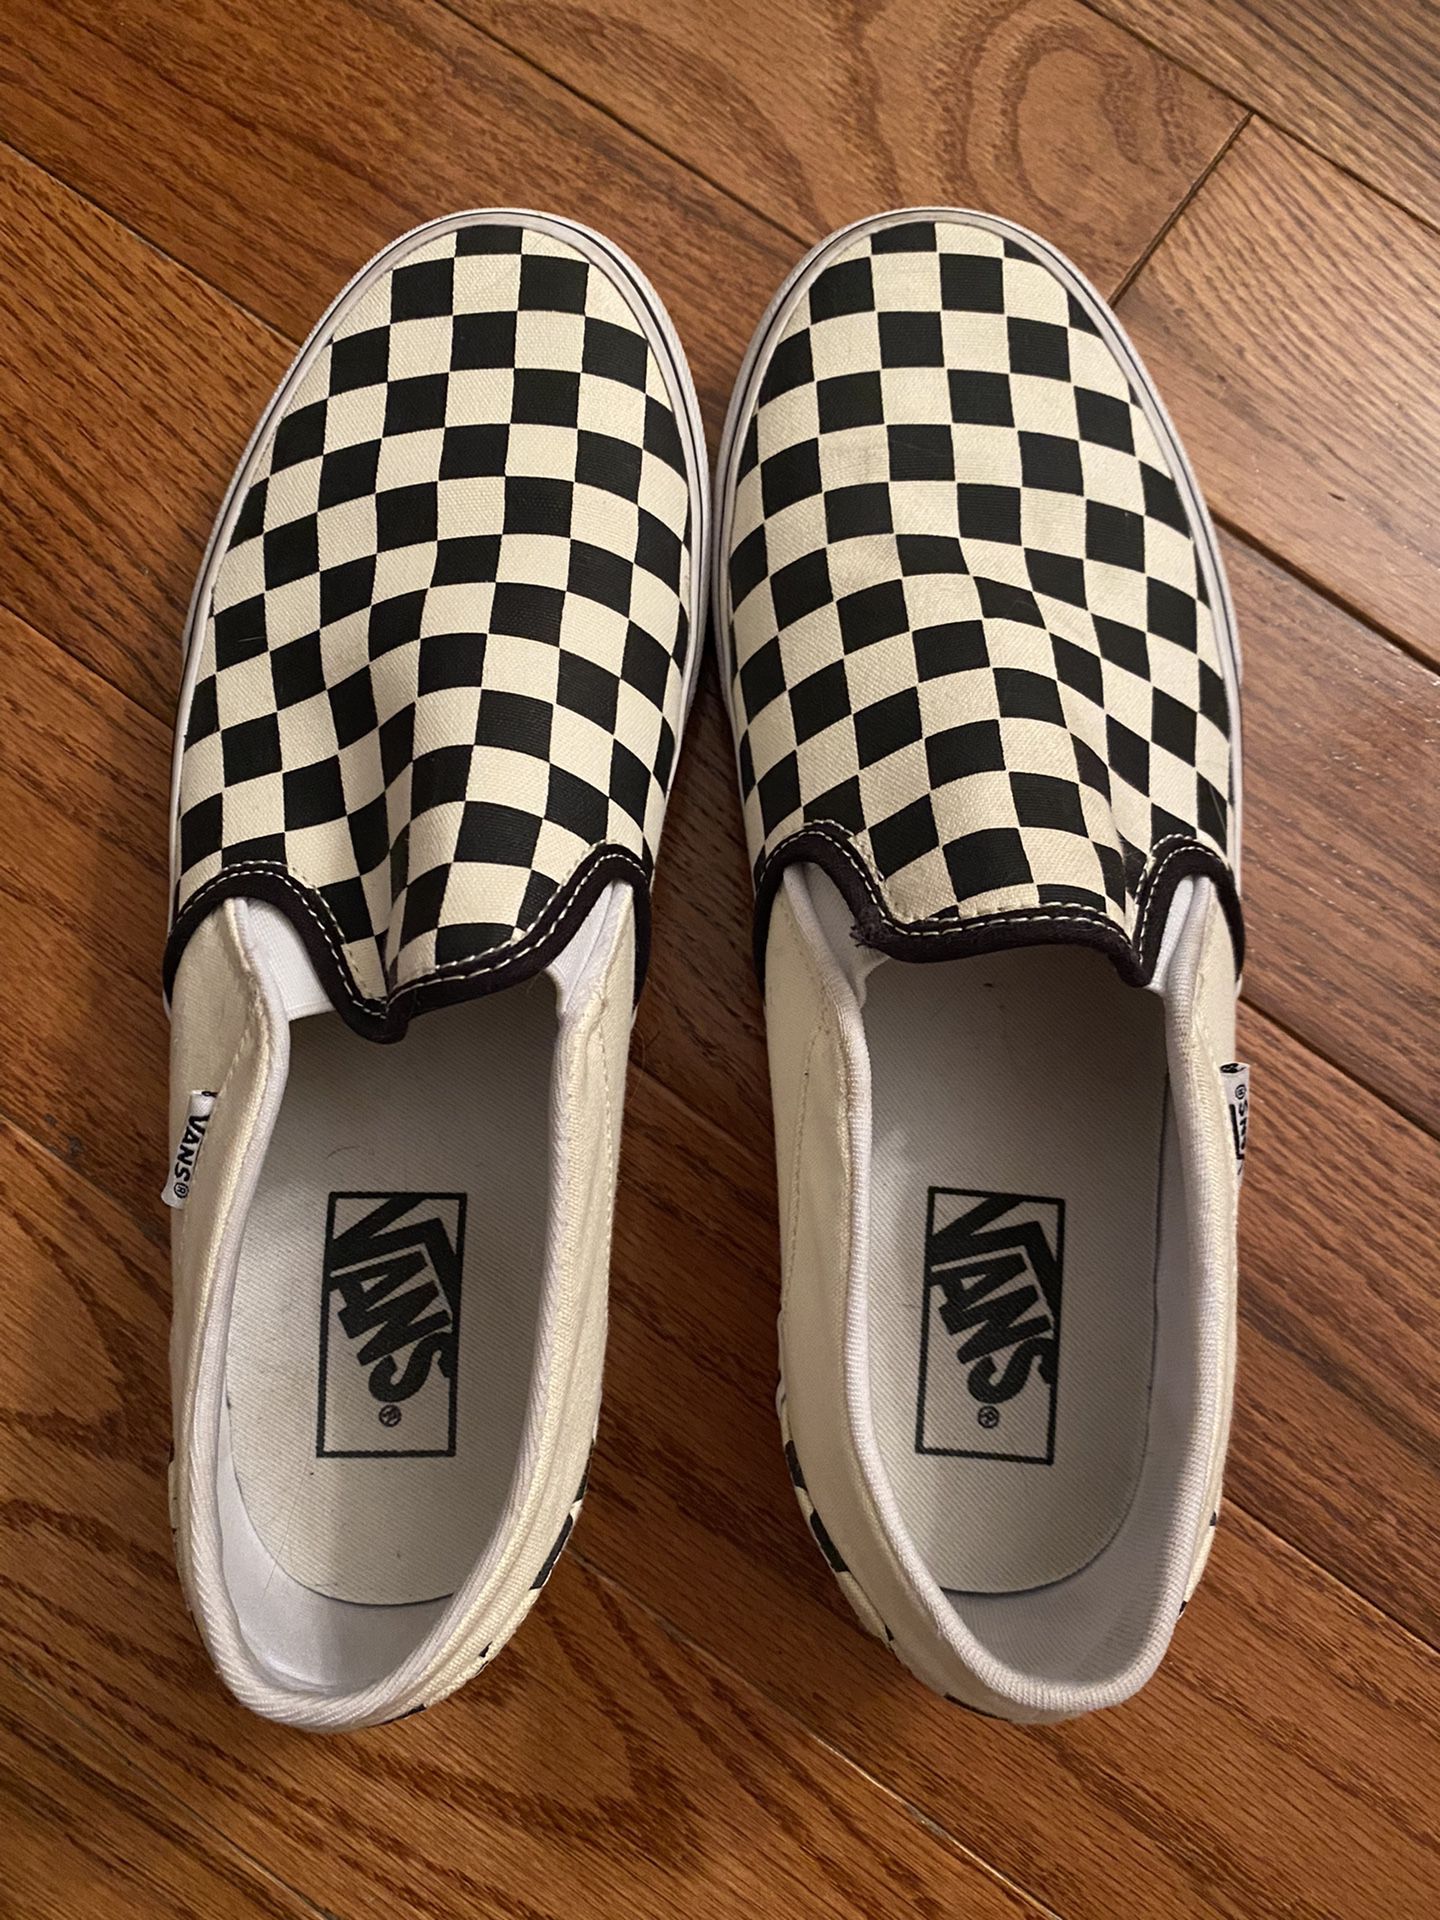 Vans Checkered Shoes Womens 9